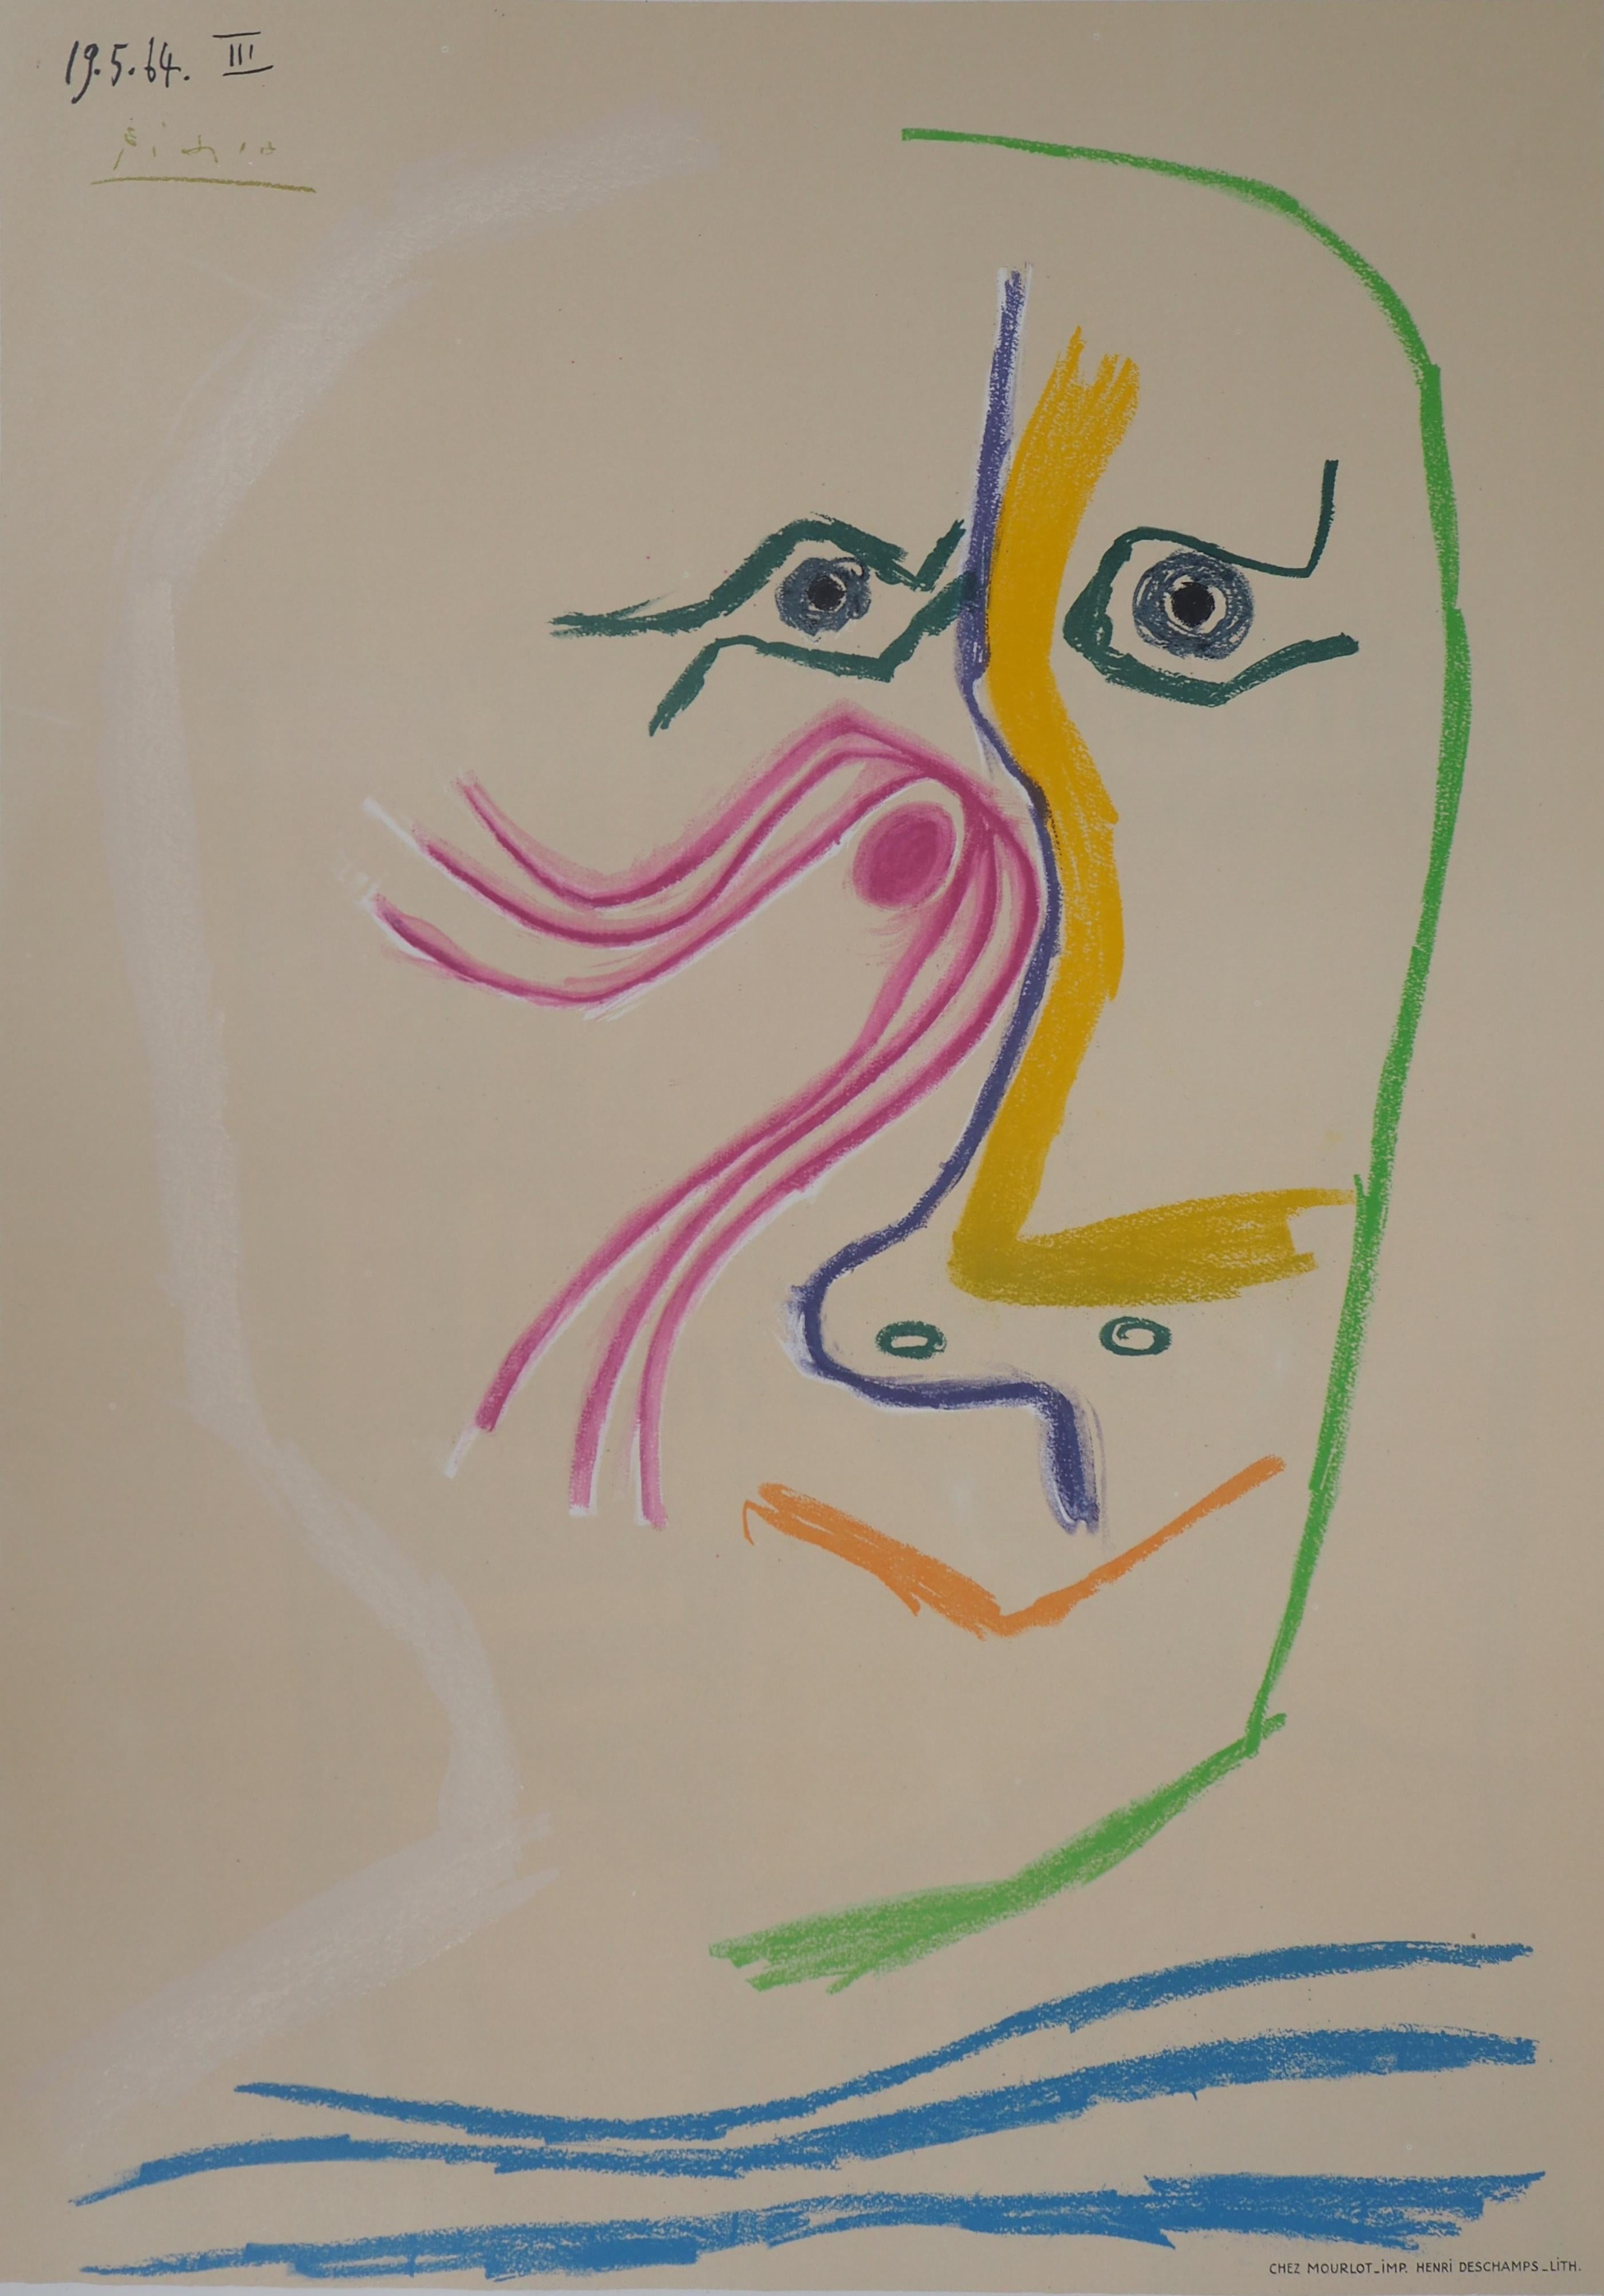 PICASSO Pablo (1881-1973) (after)
Cubist Portrait, Tribute to Rene Char, 1969

Lithograph poster (Atelier Mourlot)
Printed signature in the plate
On paper 78 x 52 cm (c. 21 x 21 inch)

REFERENCES : Catalog raisonne Cwiklitzer #291
Lithograph created